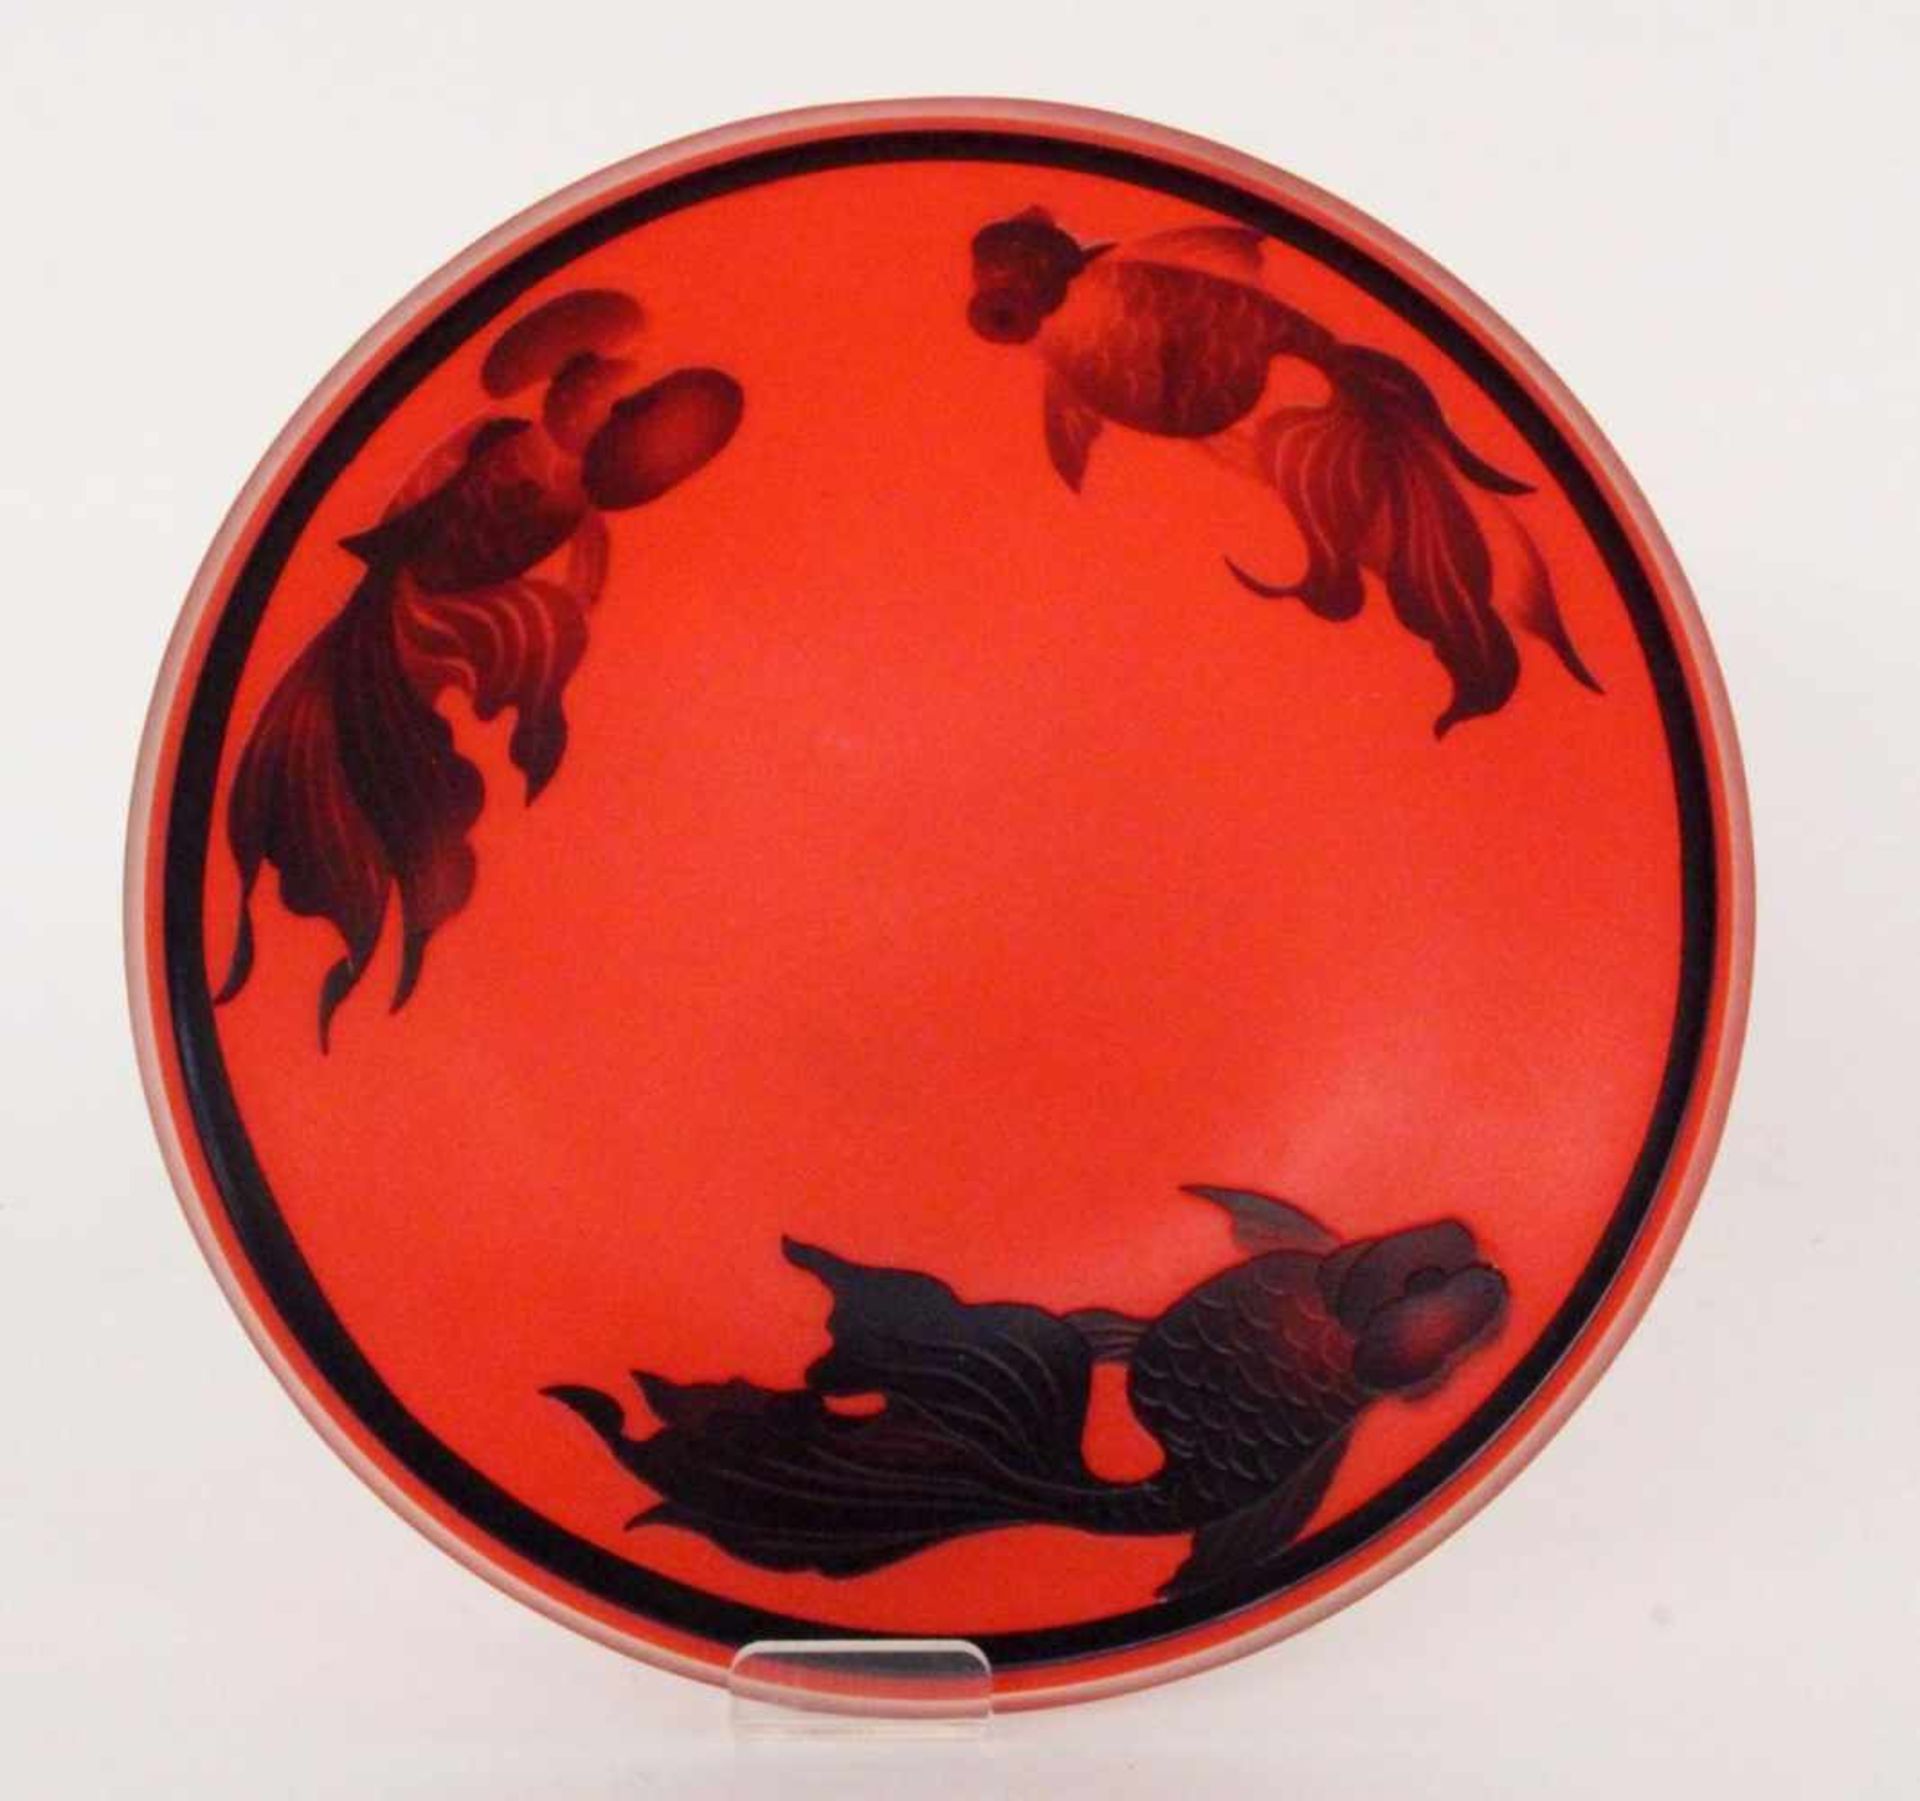 A GLASS BOWL probably Japan Orange-red glass with black overlay and etched koi carp.Diameter 20.5